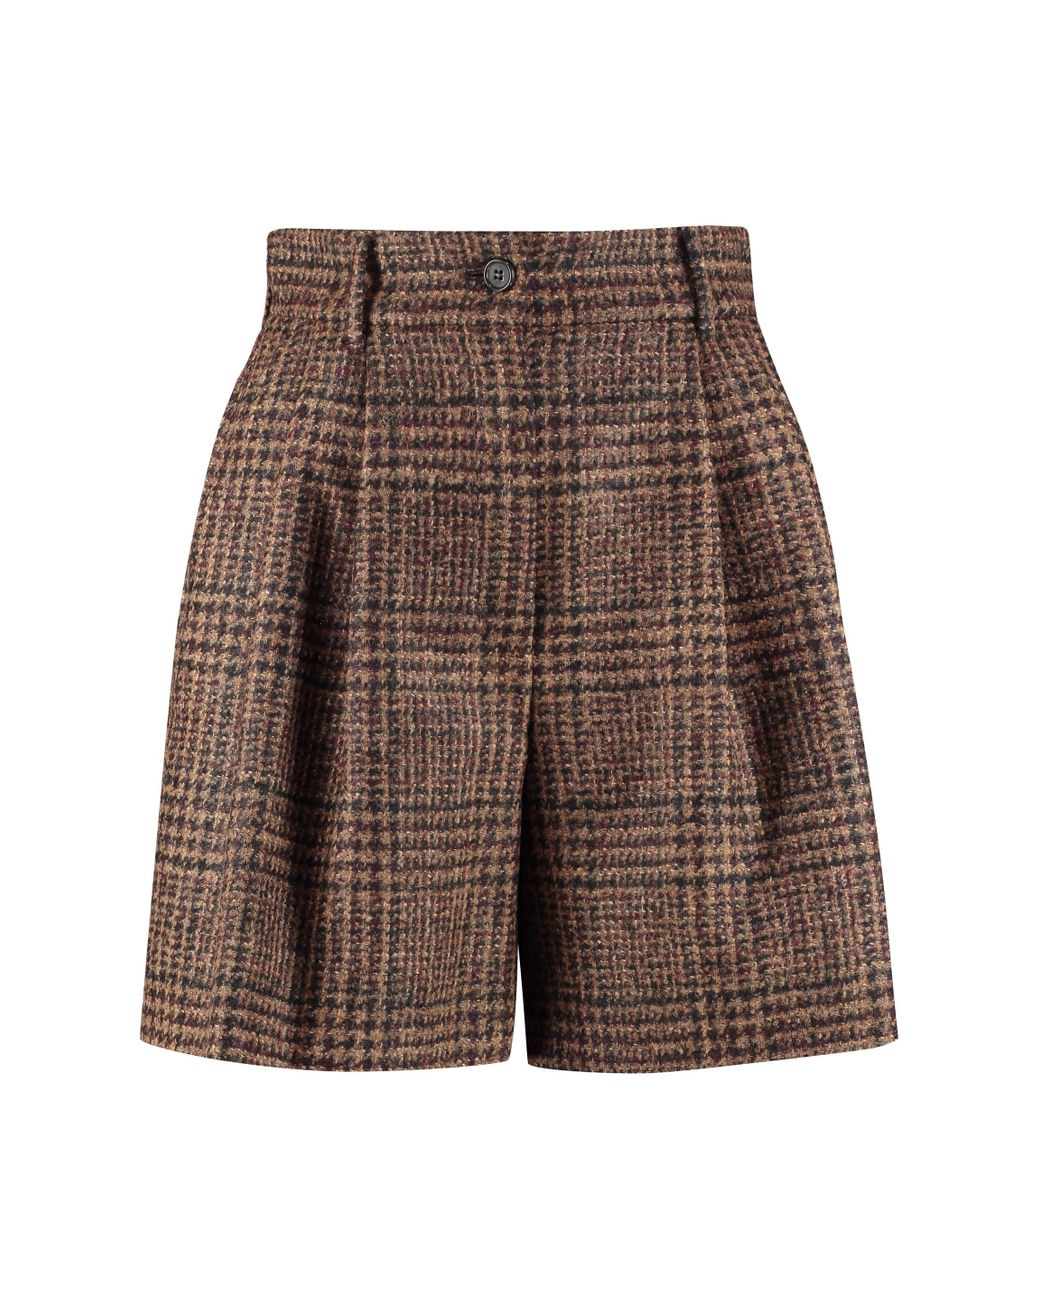 Dolce & Gabbana Checked Wool Shorts in Brown - Lyst